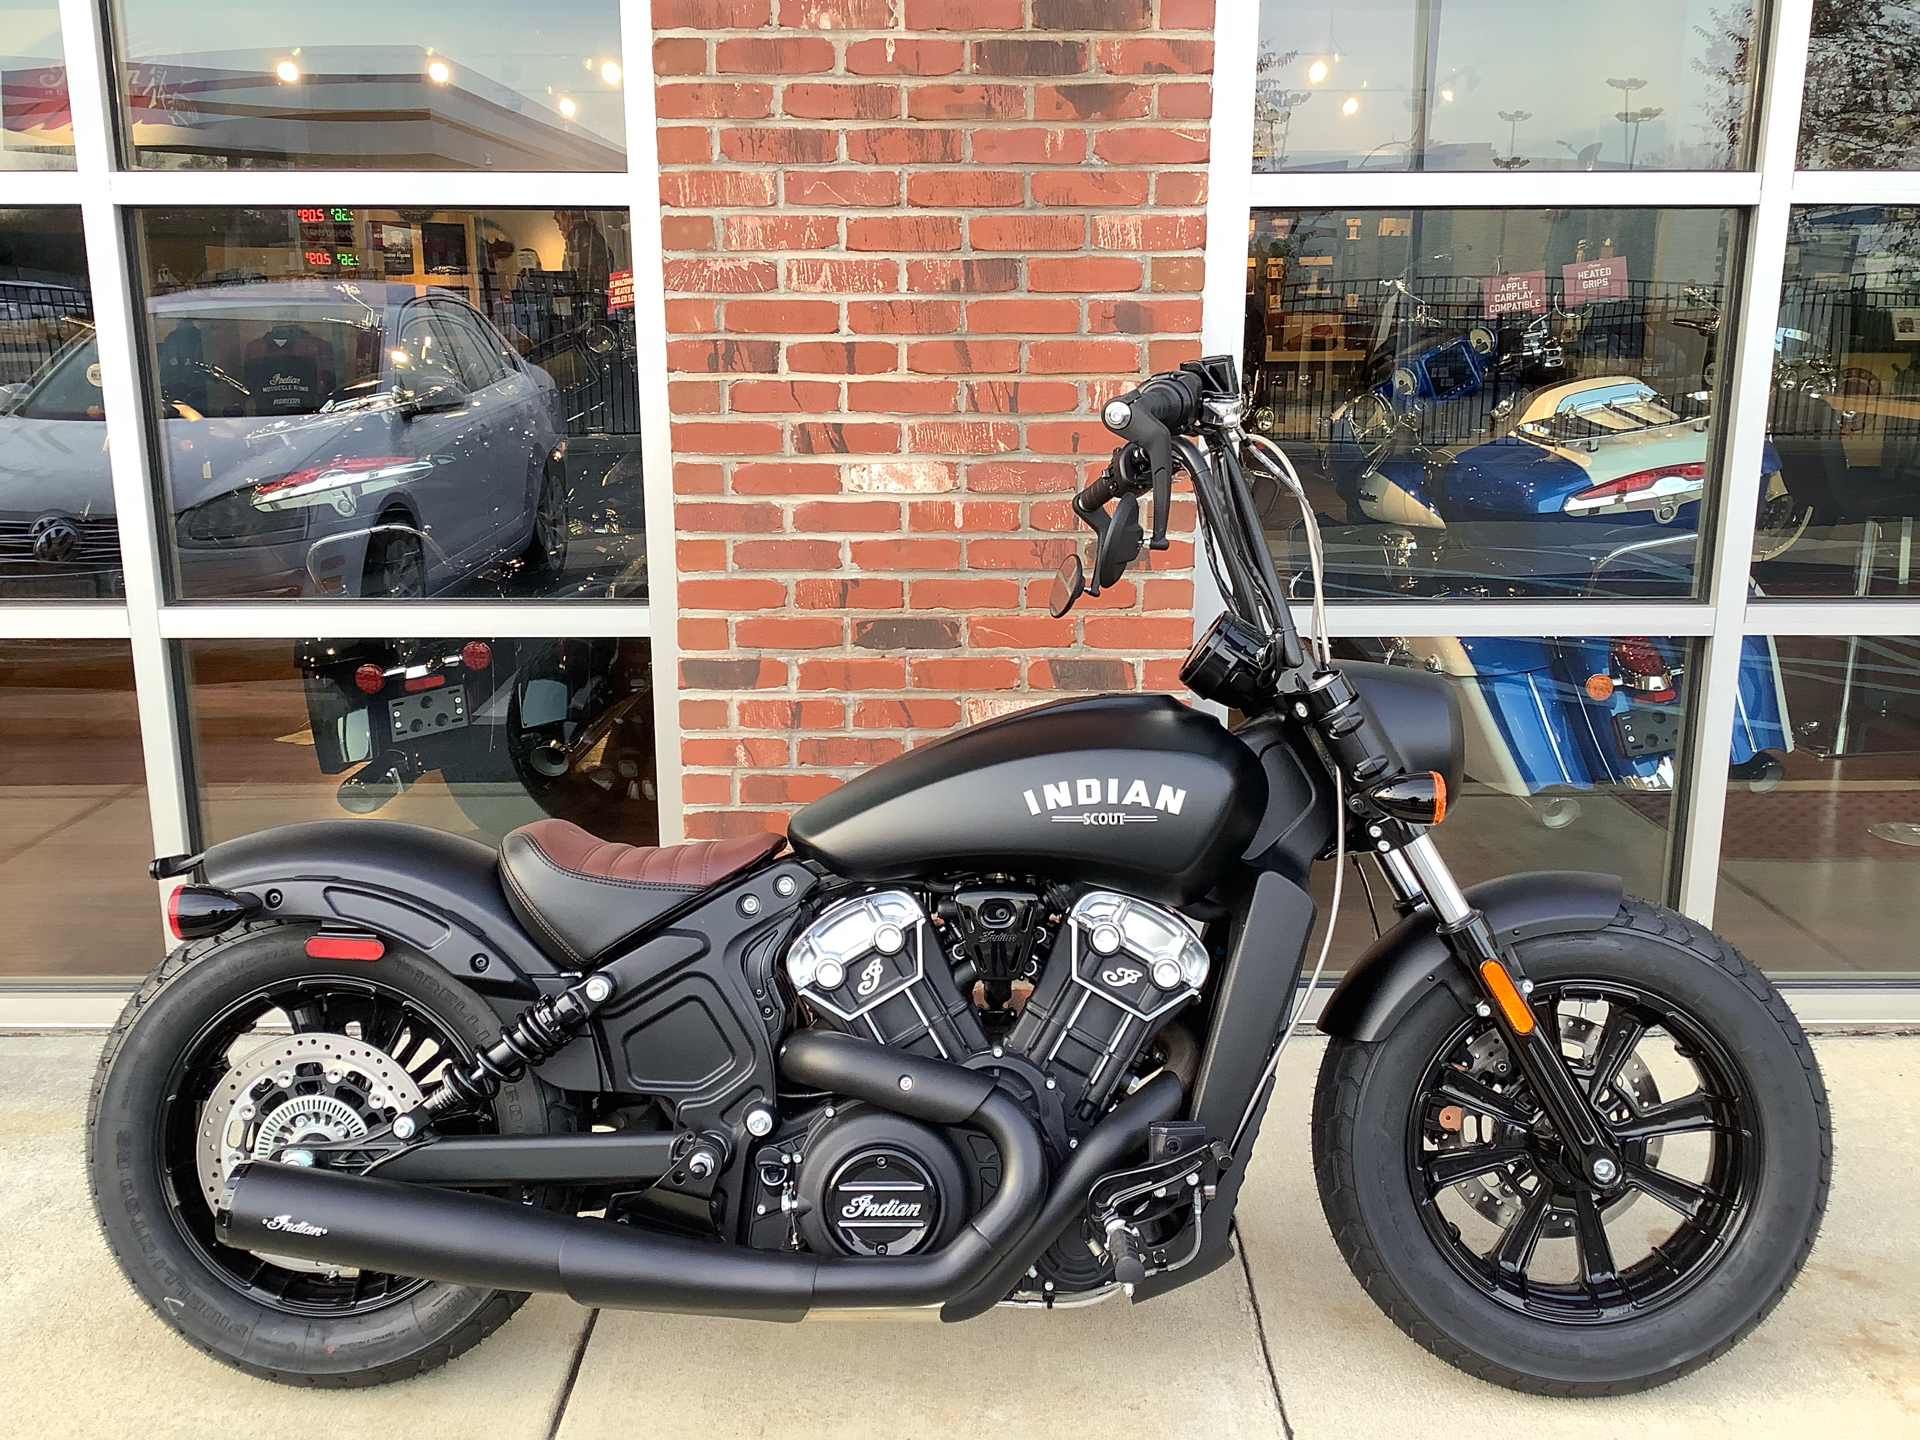 2021 Indian Scout Bobber Abs Motorcycles Newport News Virginia Ind164402